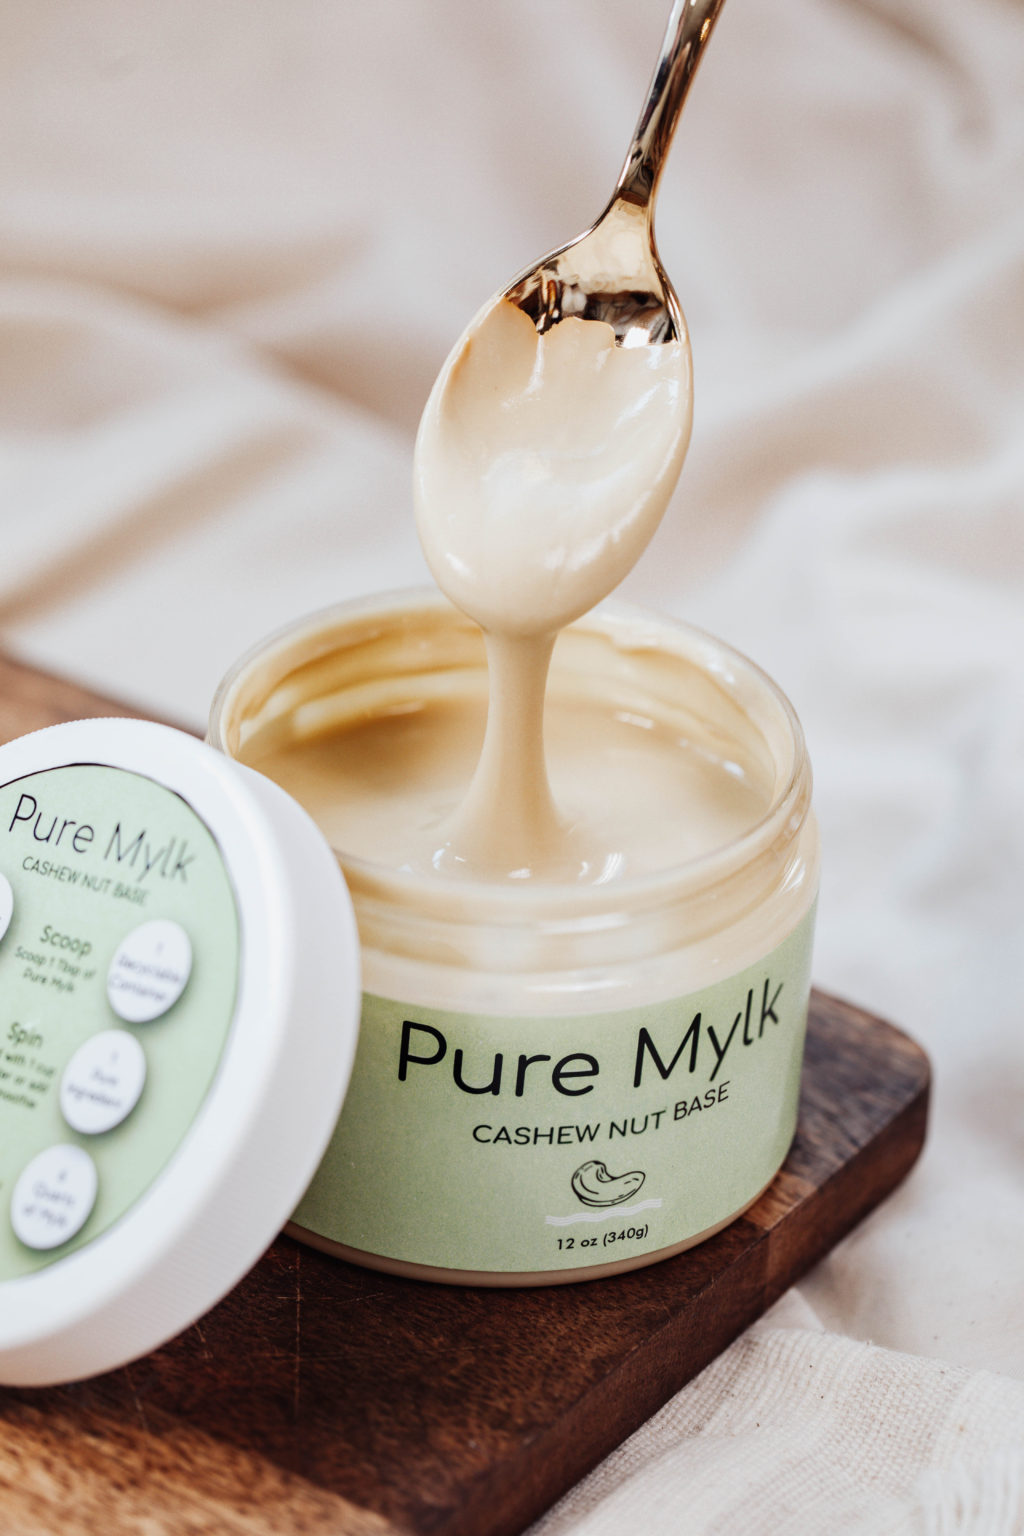 Image of Pure Mylk Chase nut base cream. A spoon is being pulled out of the container.